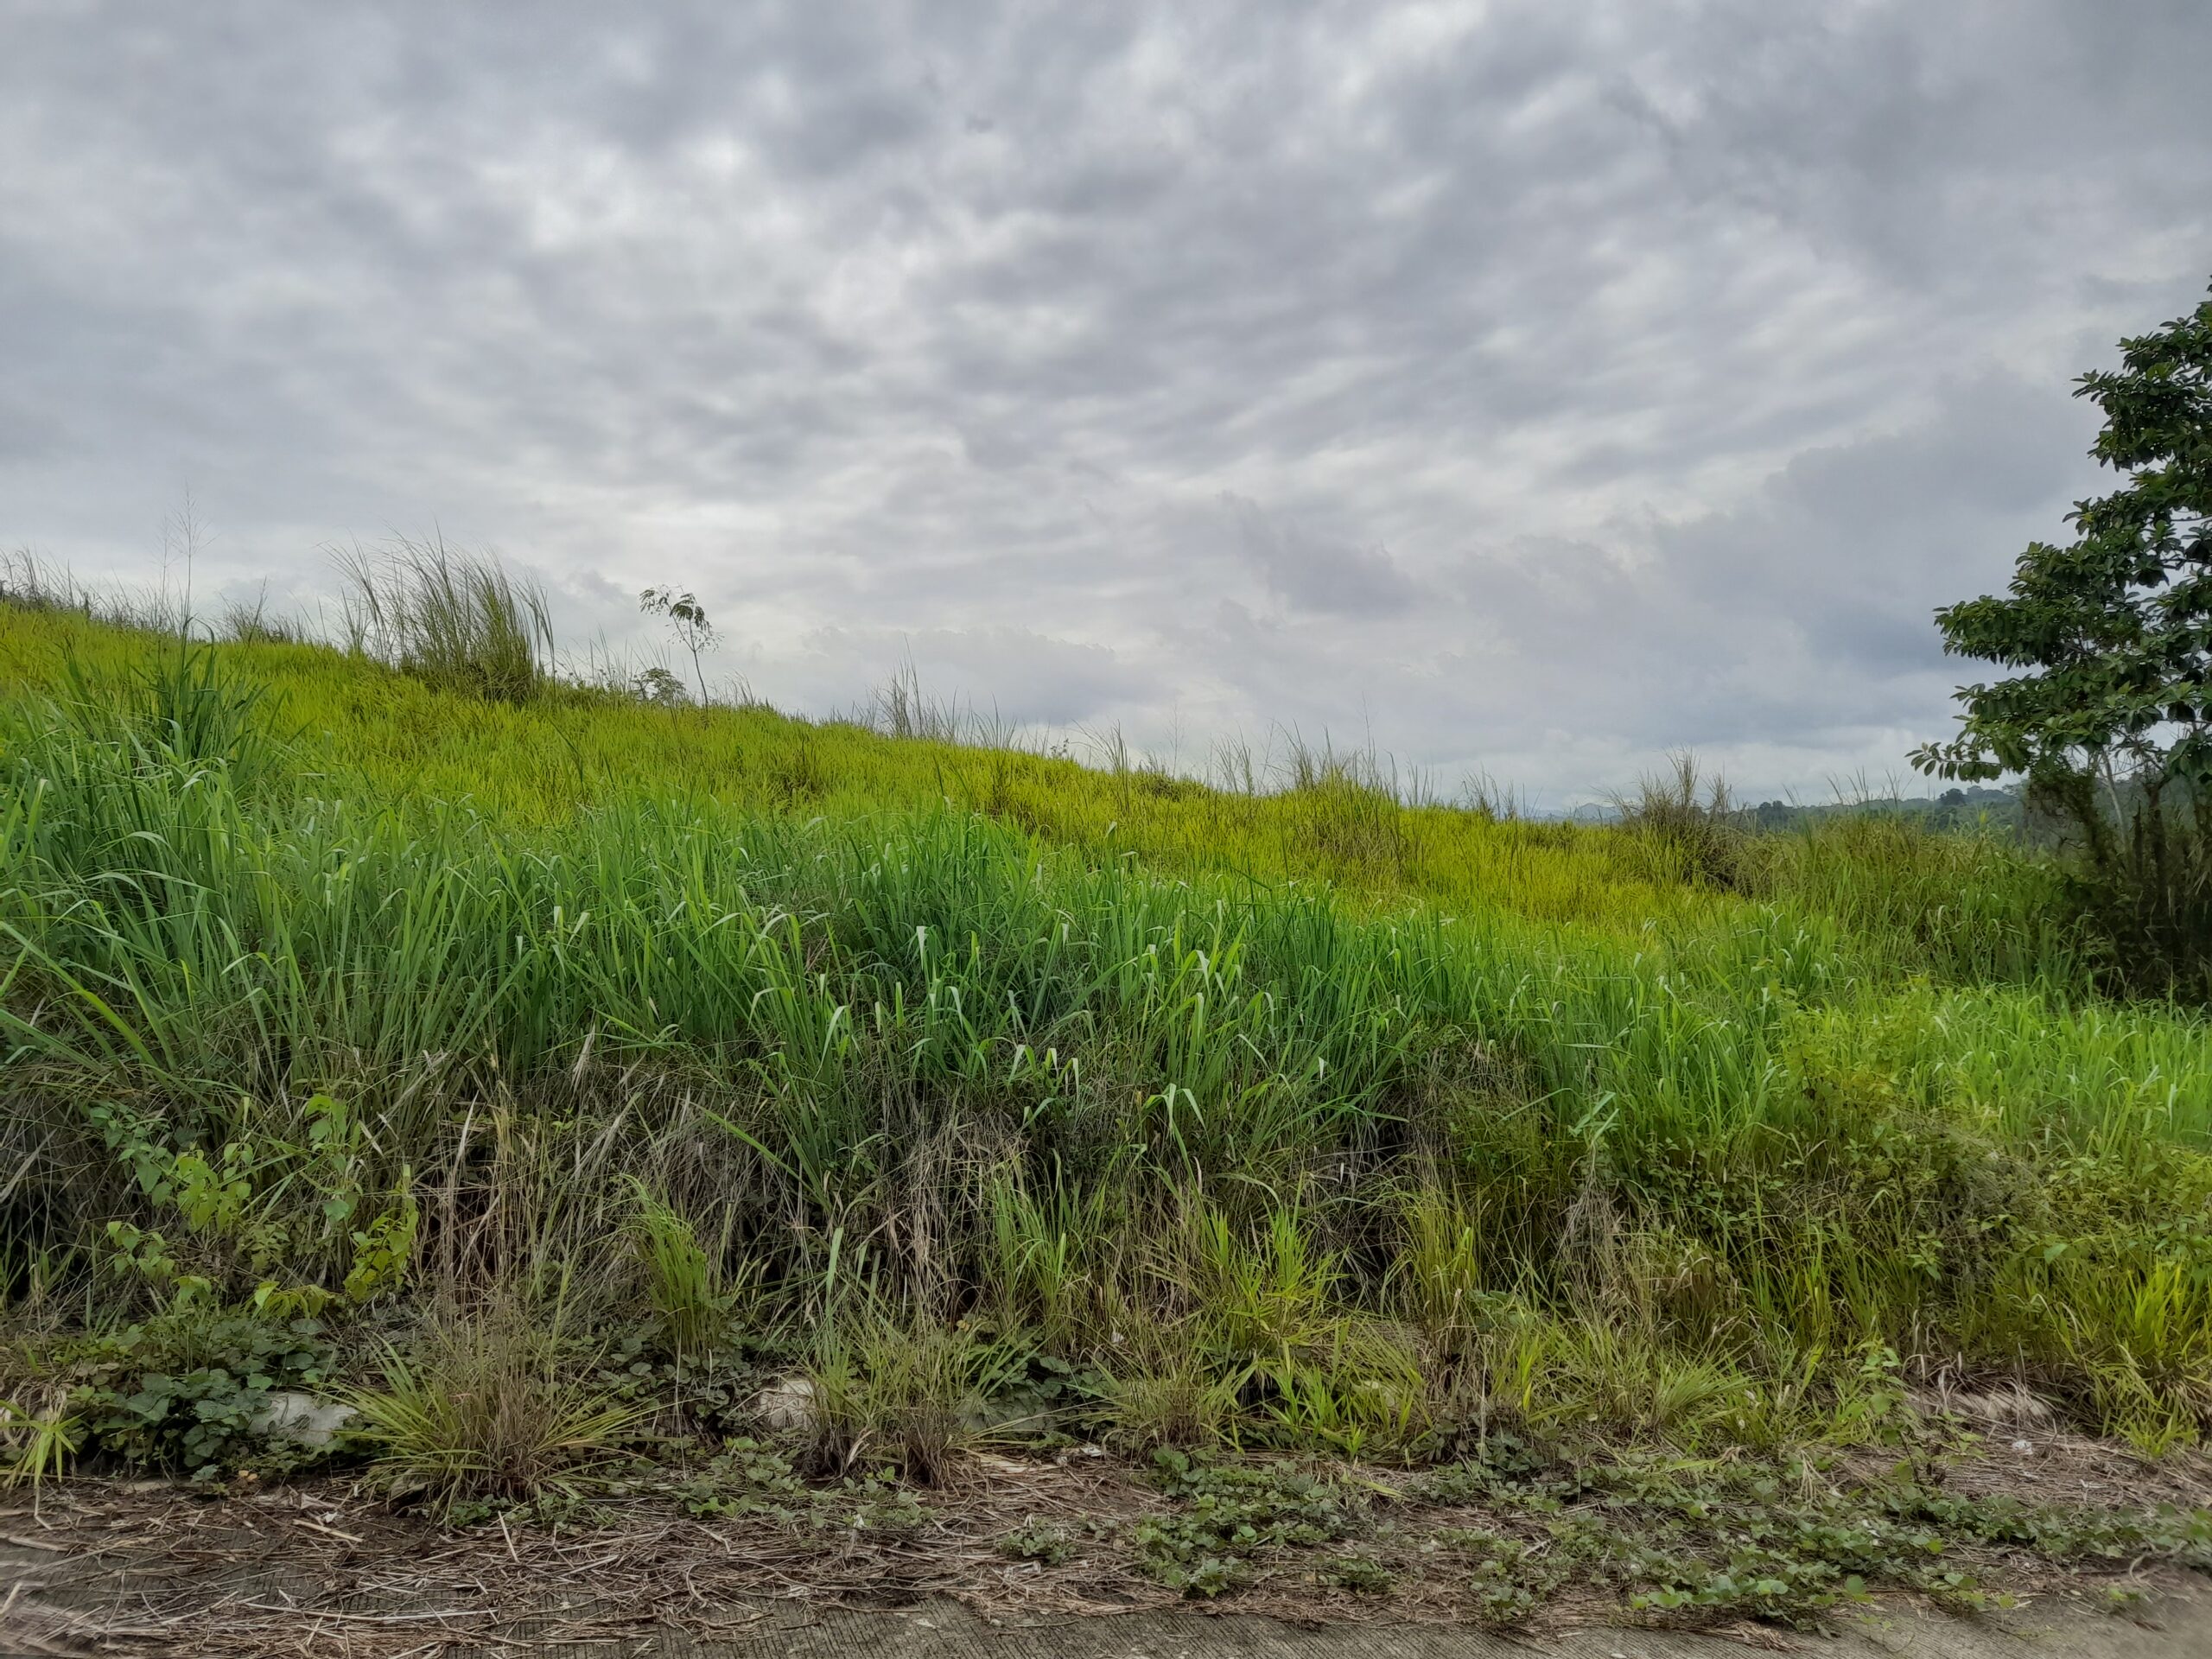 For Sale: 556sqm. Vacant Lot Eastland Heights Subdivision in Antipolo, Rizal